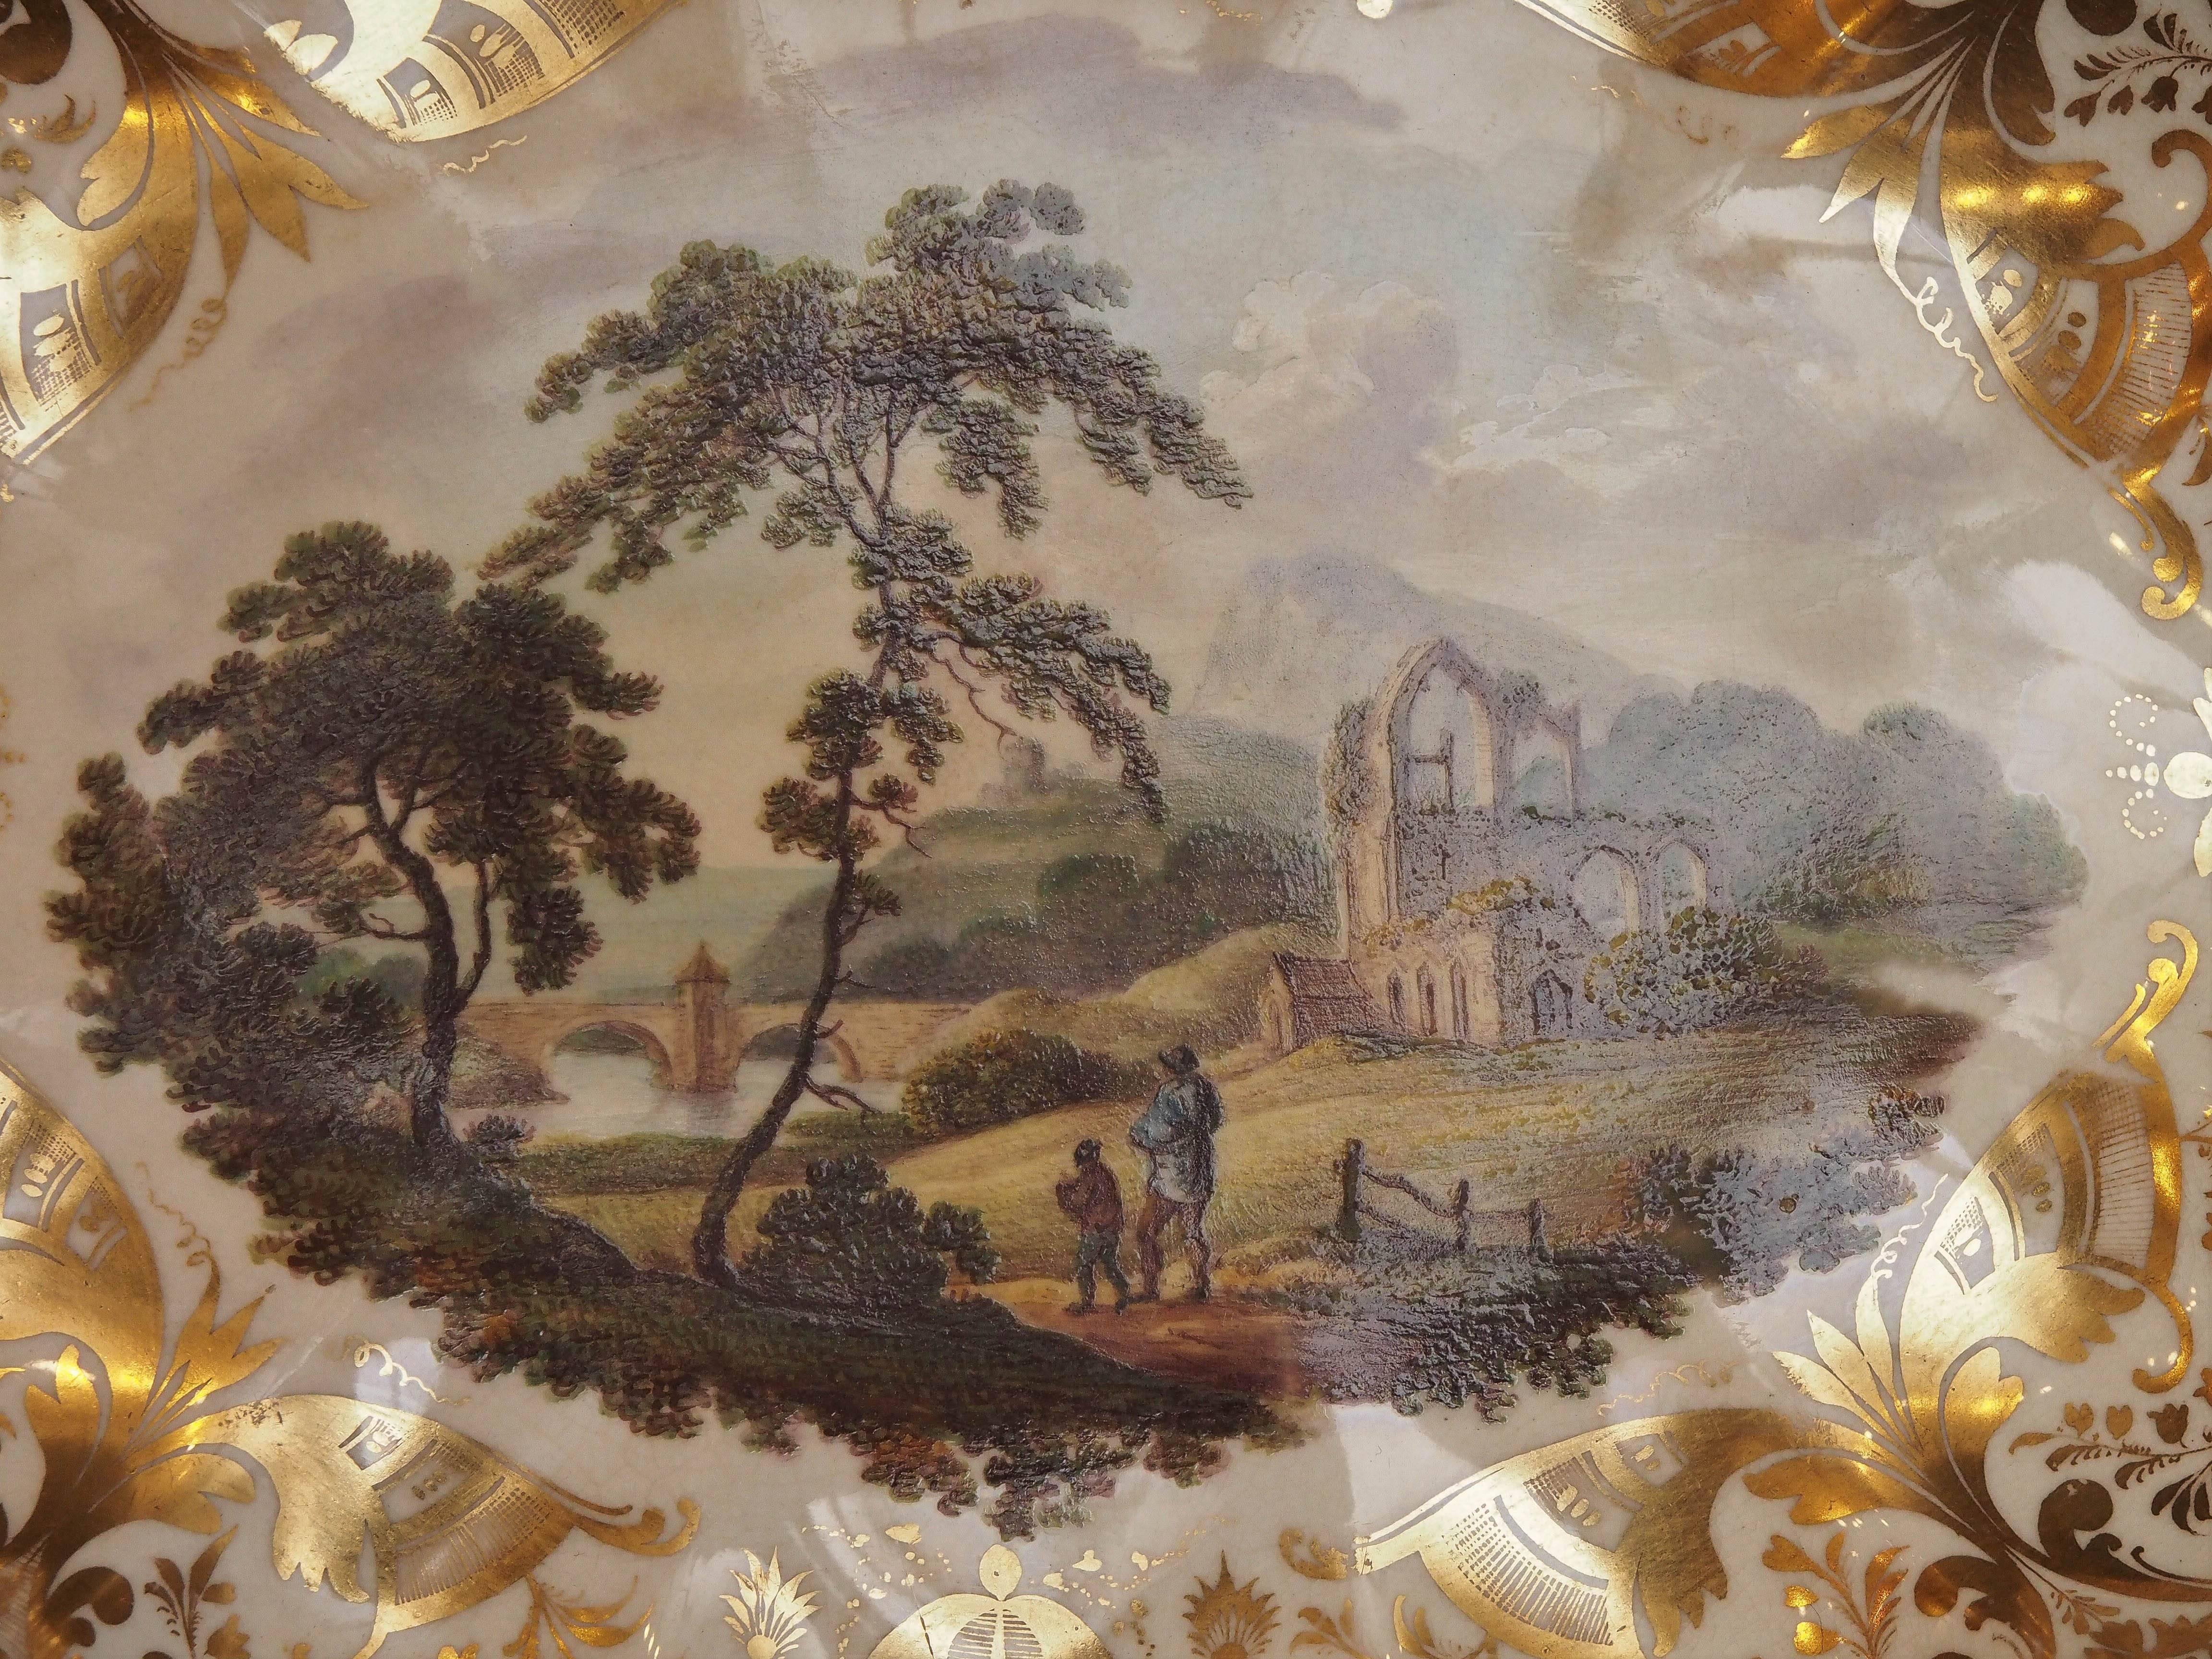 Derby scalloped dish with pastoral painted scene with gilt border decoration.